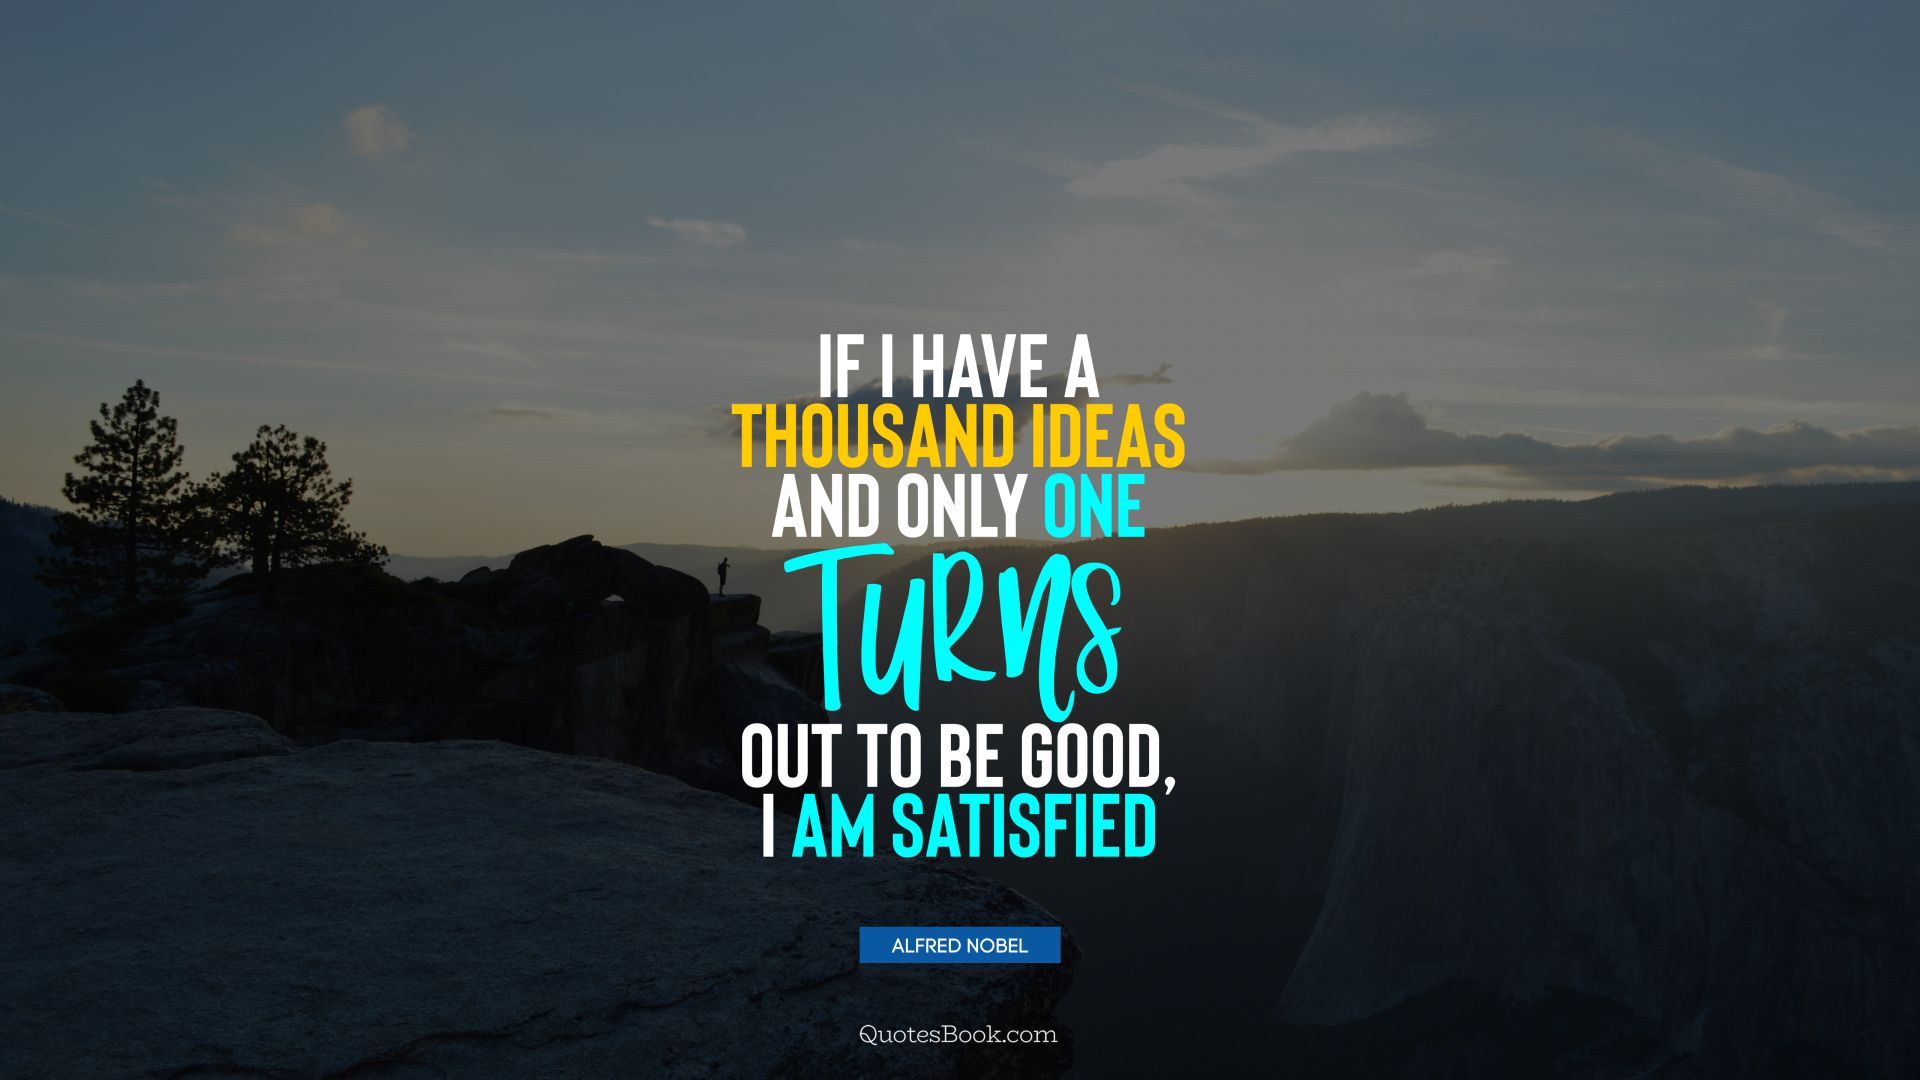 If I have a thousand ideas and only one turns out to be good, I am satisfied. - Quote by Alfred Nobel